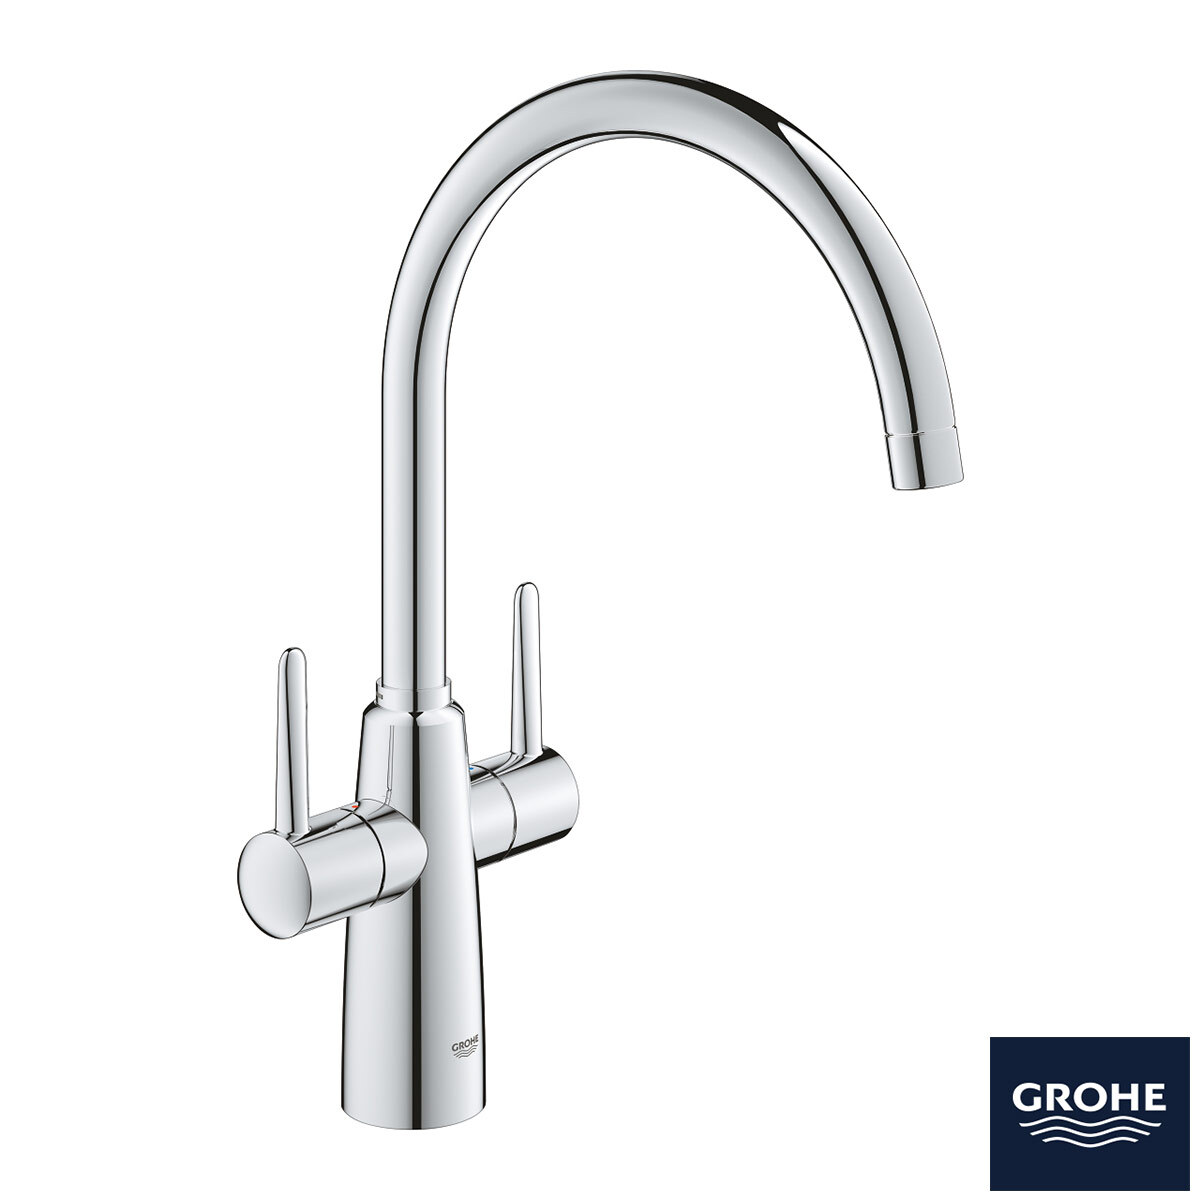 GROHE Ambi Dual Lever Tap | Costco UK